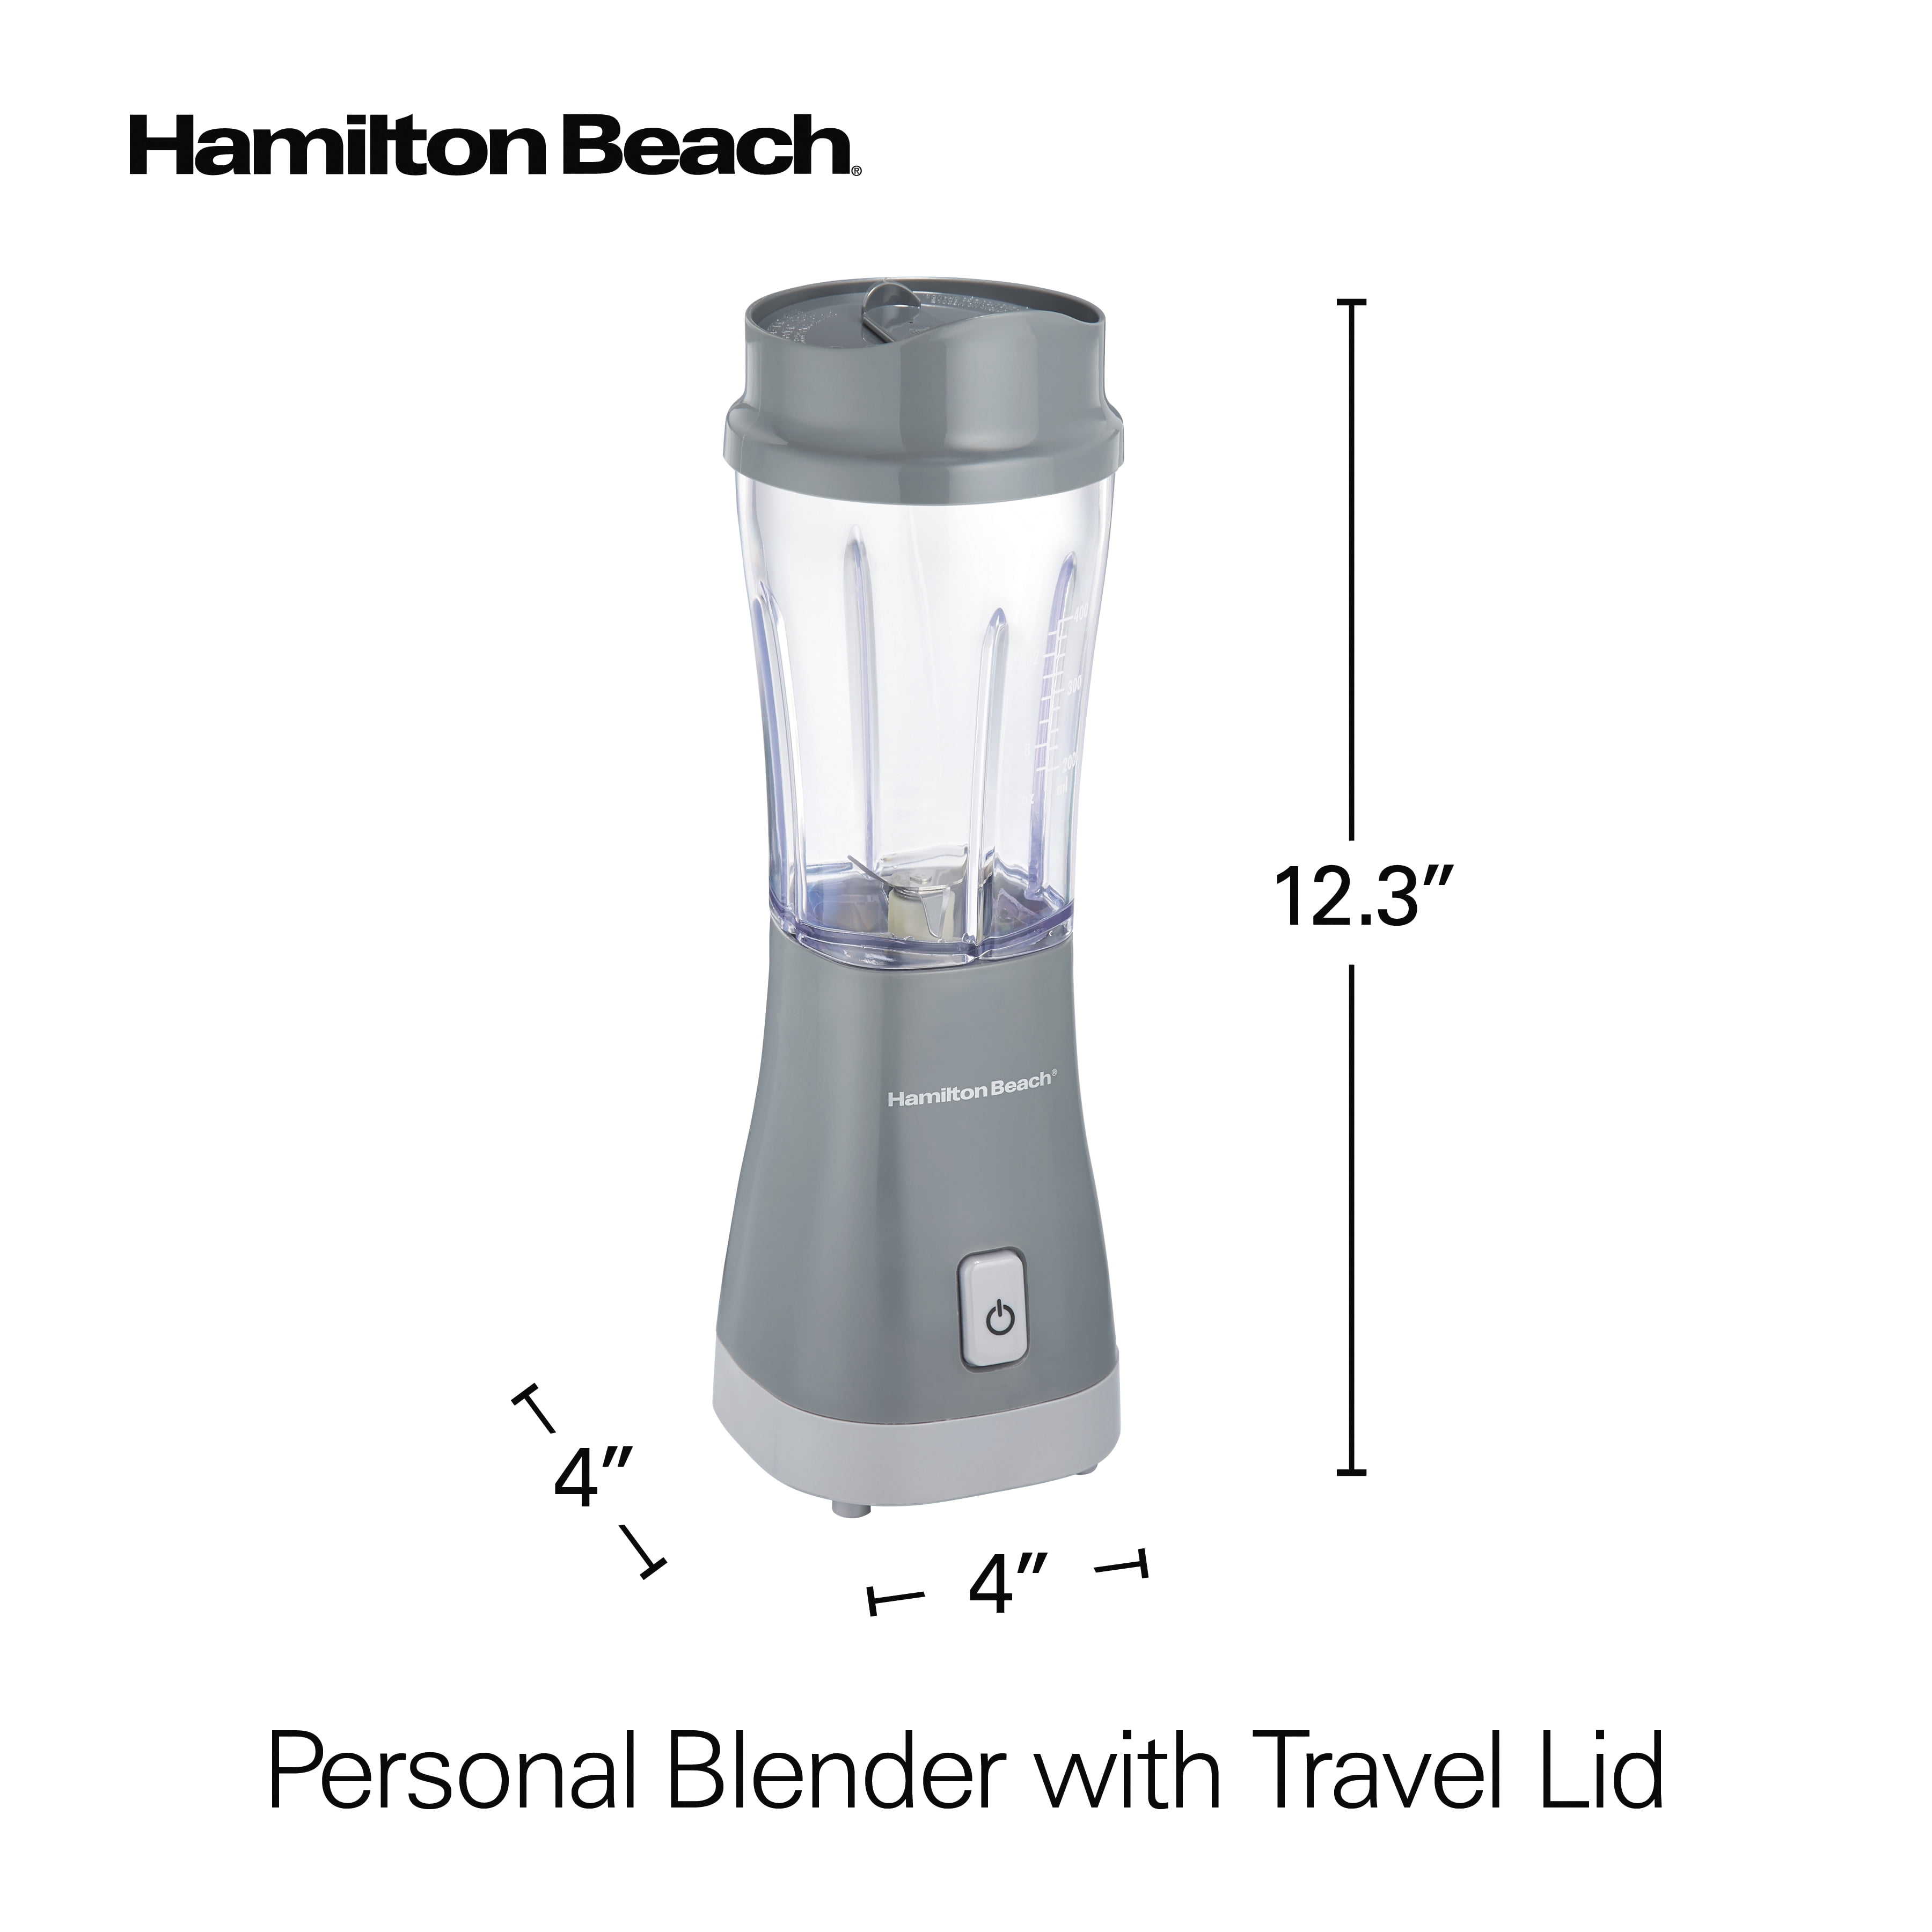 Grab this well-rated personal blender for just $10 today - CNET